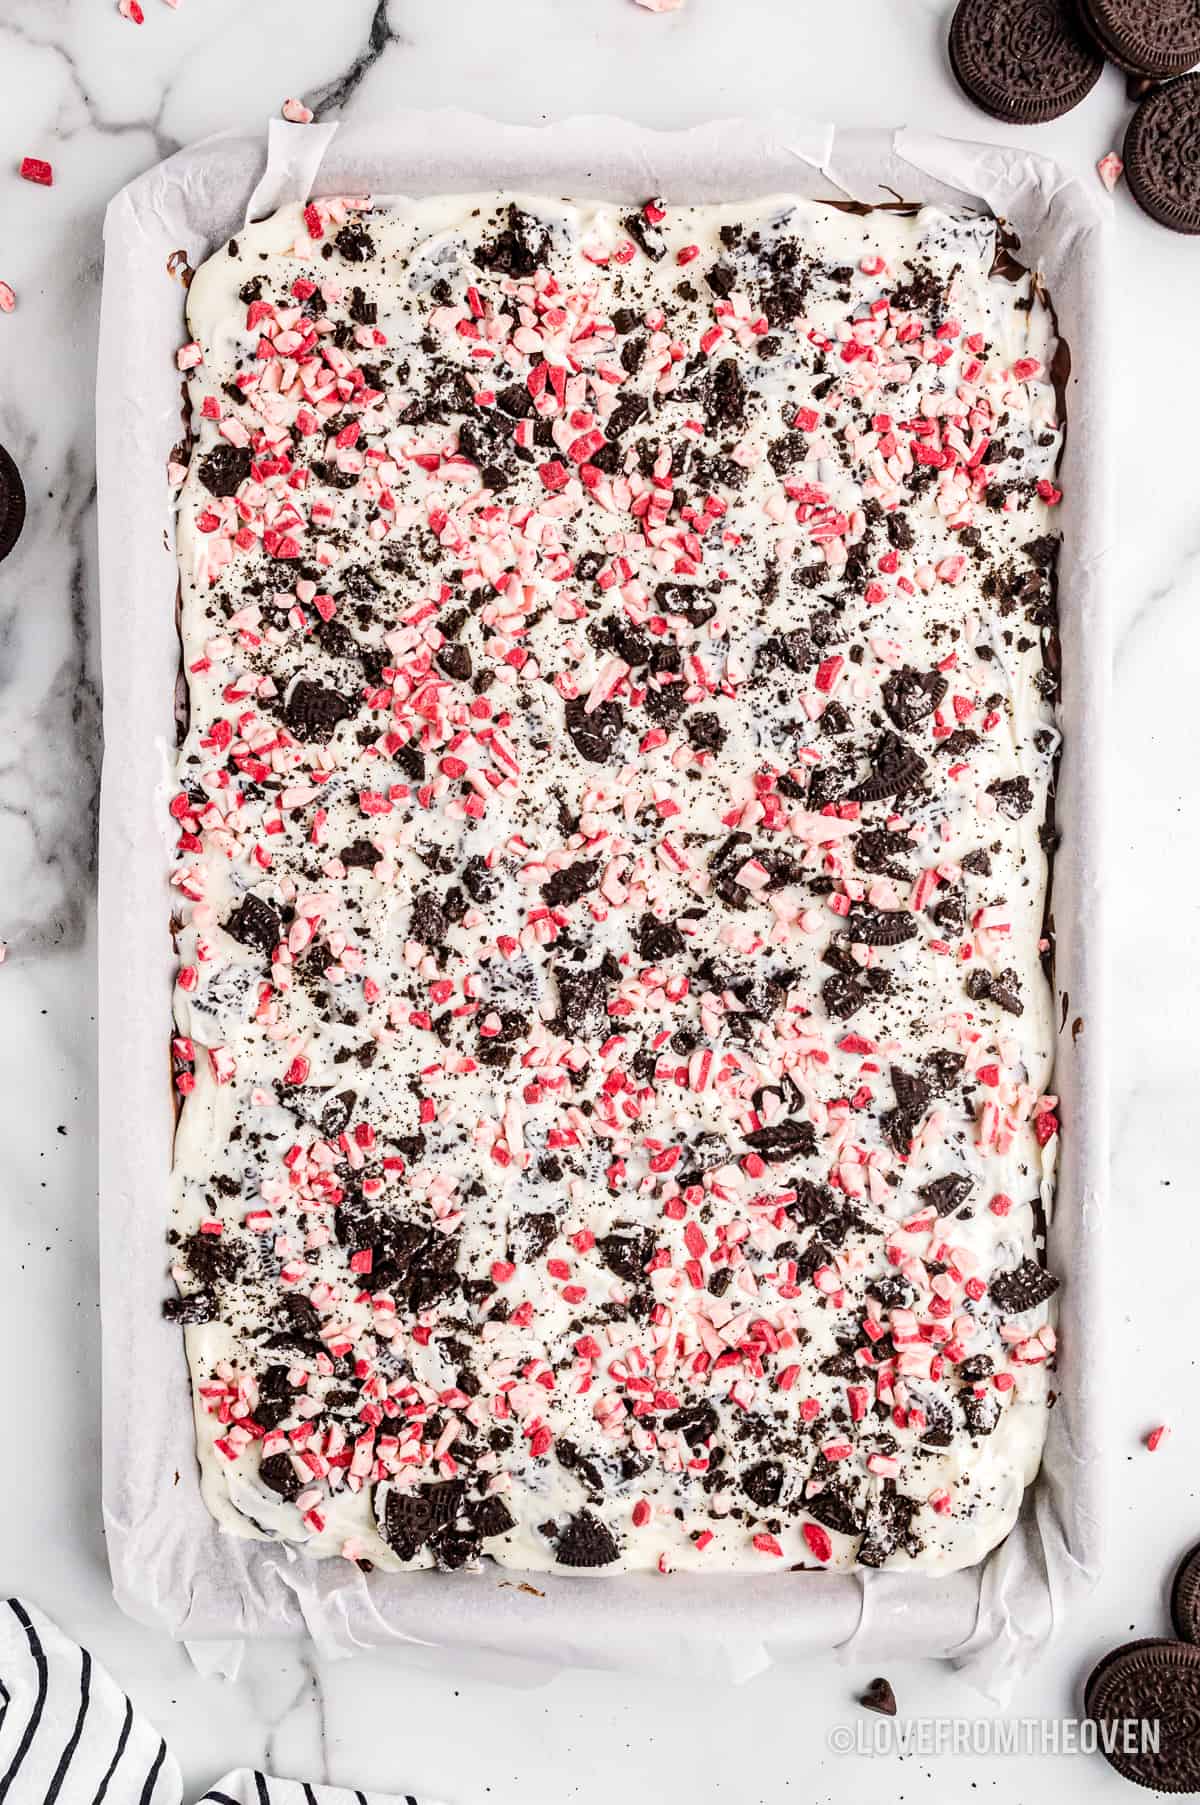 A tray of peppermint bark.